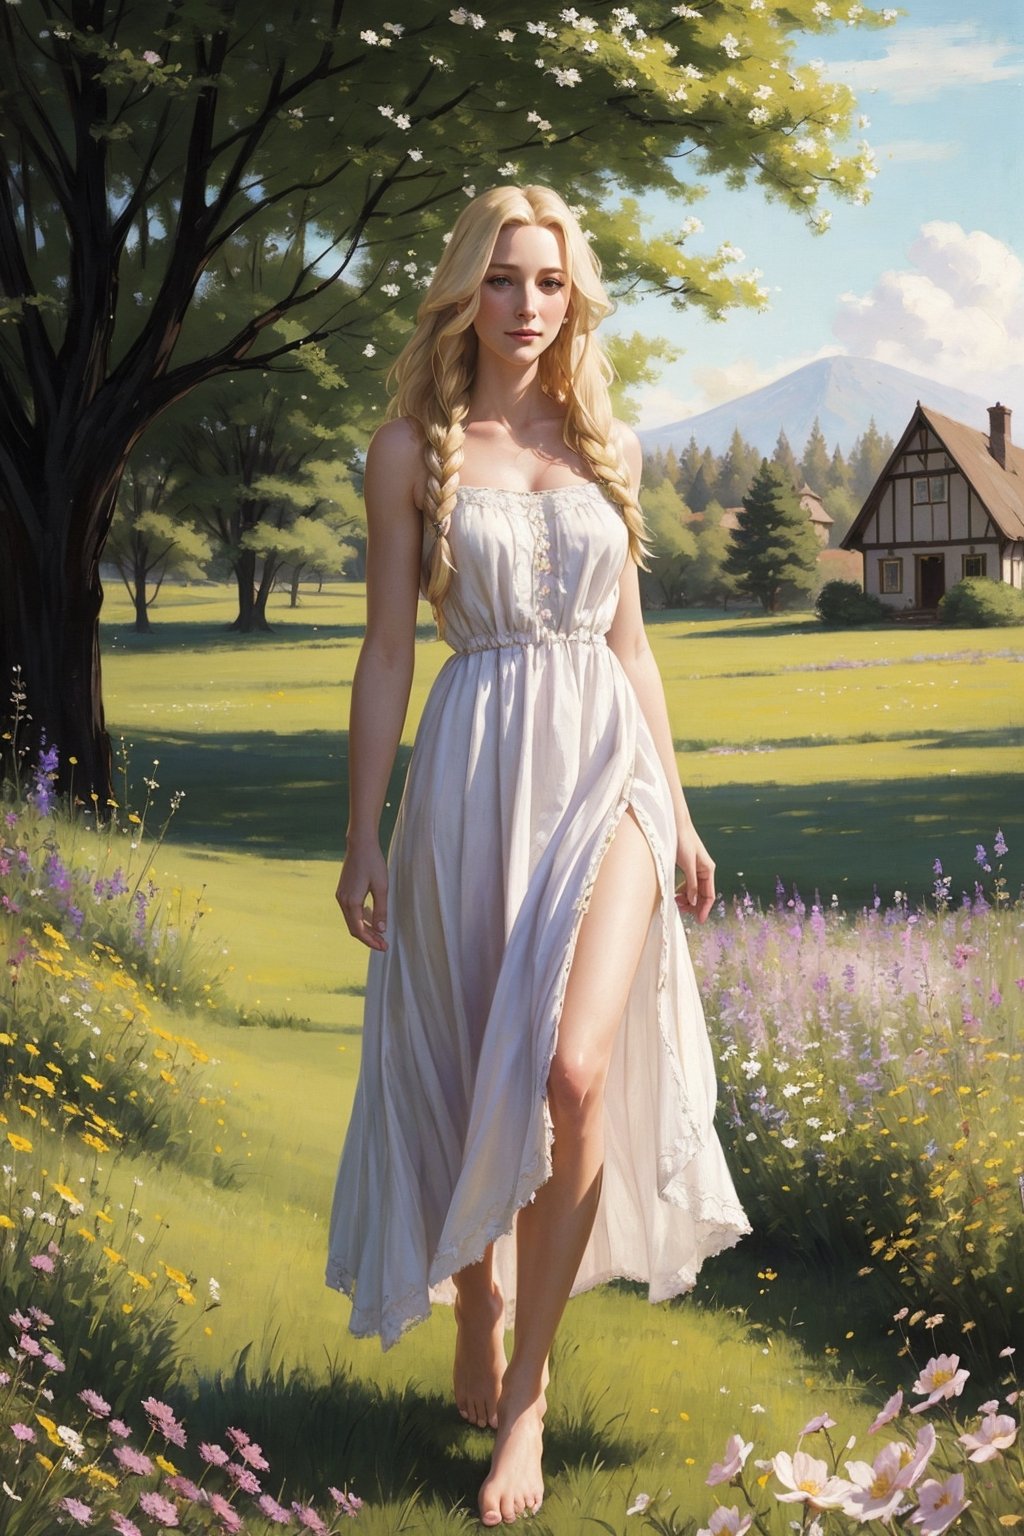 Portrait of a 25-year-old girl with long blonde hair, dressed in a dress made of light material, barefoot, standing in a meadow among flowers,looking at the house,
 brom's art, depiction of an epic fantasy character, portrait of a character, fantasy art, works by Richard Schmid, A.Mukha, Volegov, impressionism